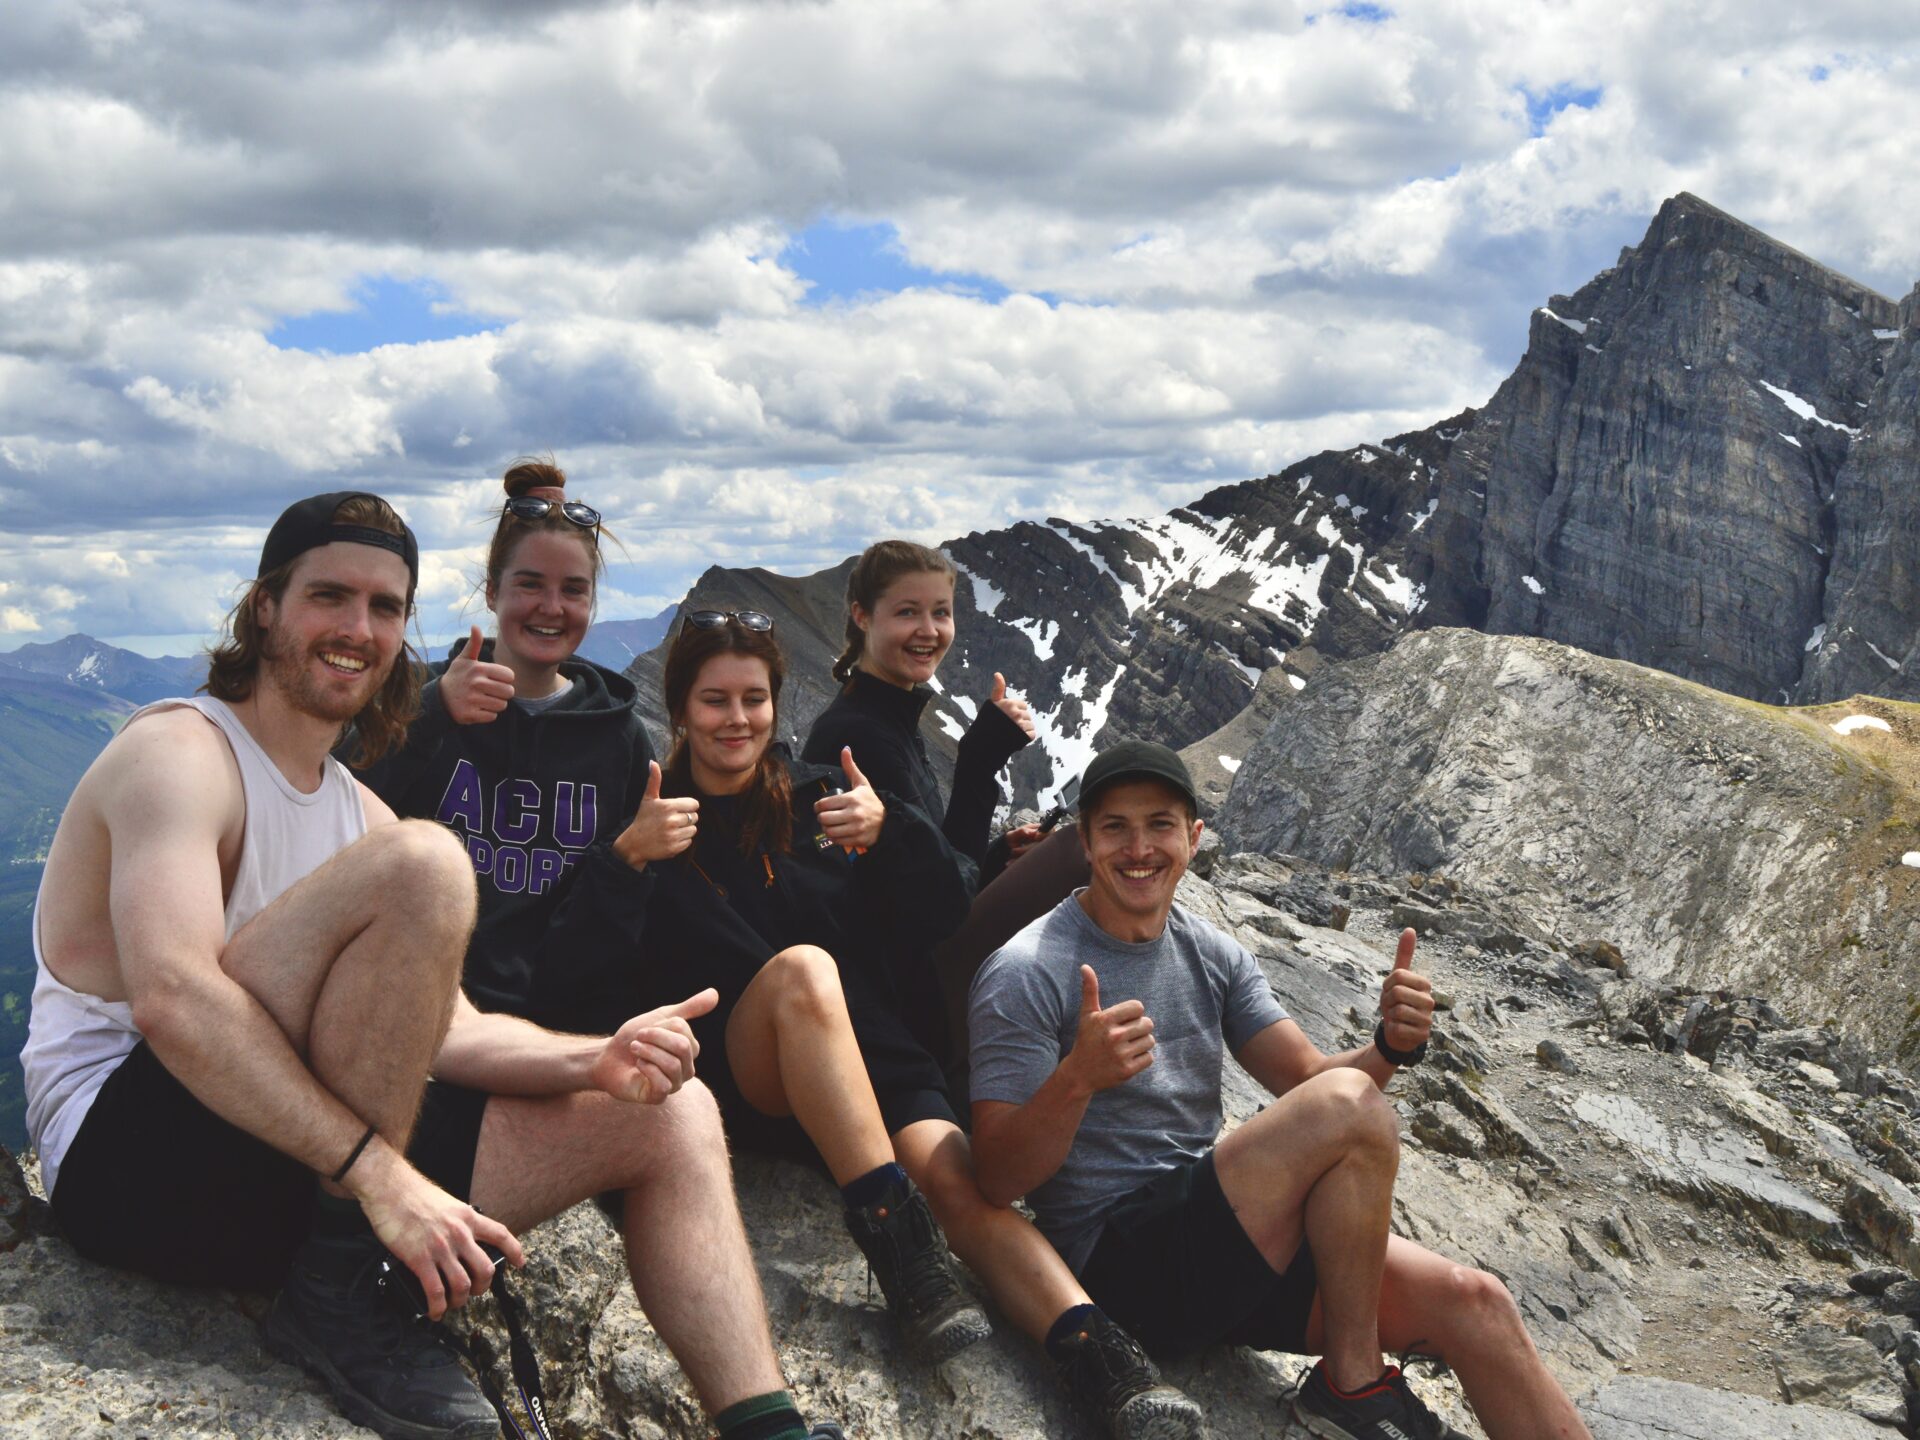 Summiting Ha Ling & Miner's Peak in Canmore - The Holistic Backpacker